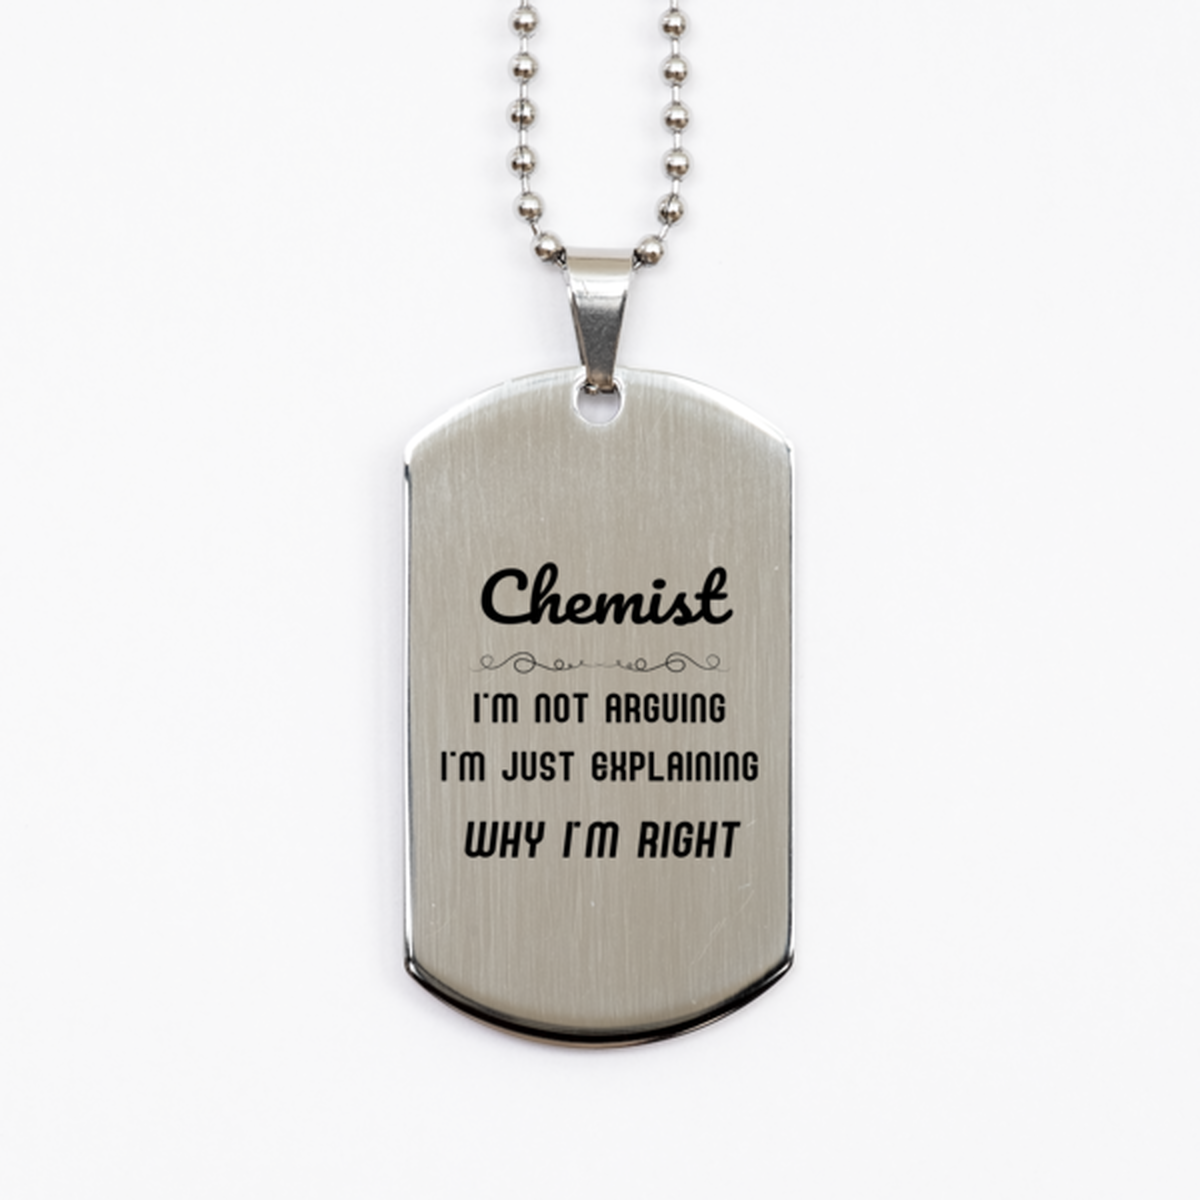 Chemist I'm not Arguing. I'm Just Explaining Why I'm RIGHT Silver Dog Tag, Funny Saying Quote Chemist Gifts For Chemist Graduation Birthday Christmas Gifts for Men Women Coworker